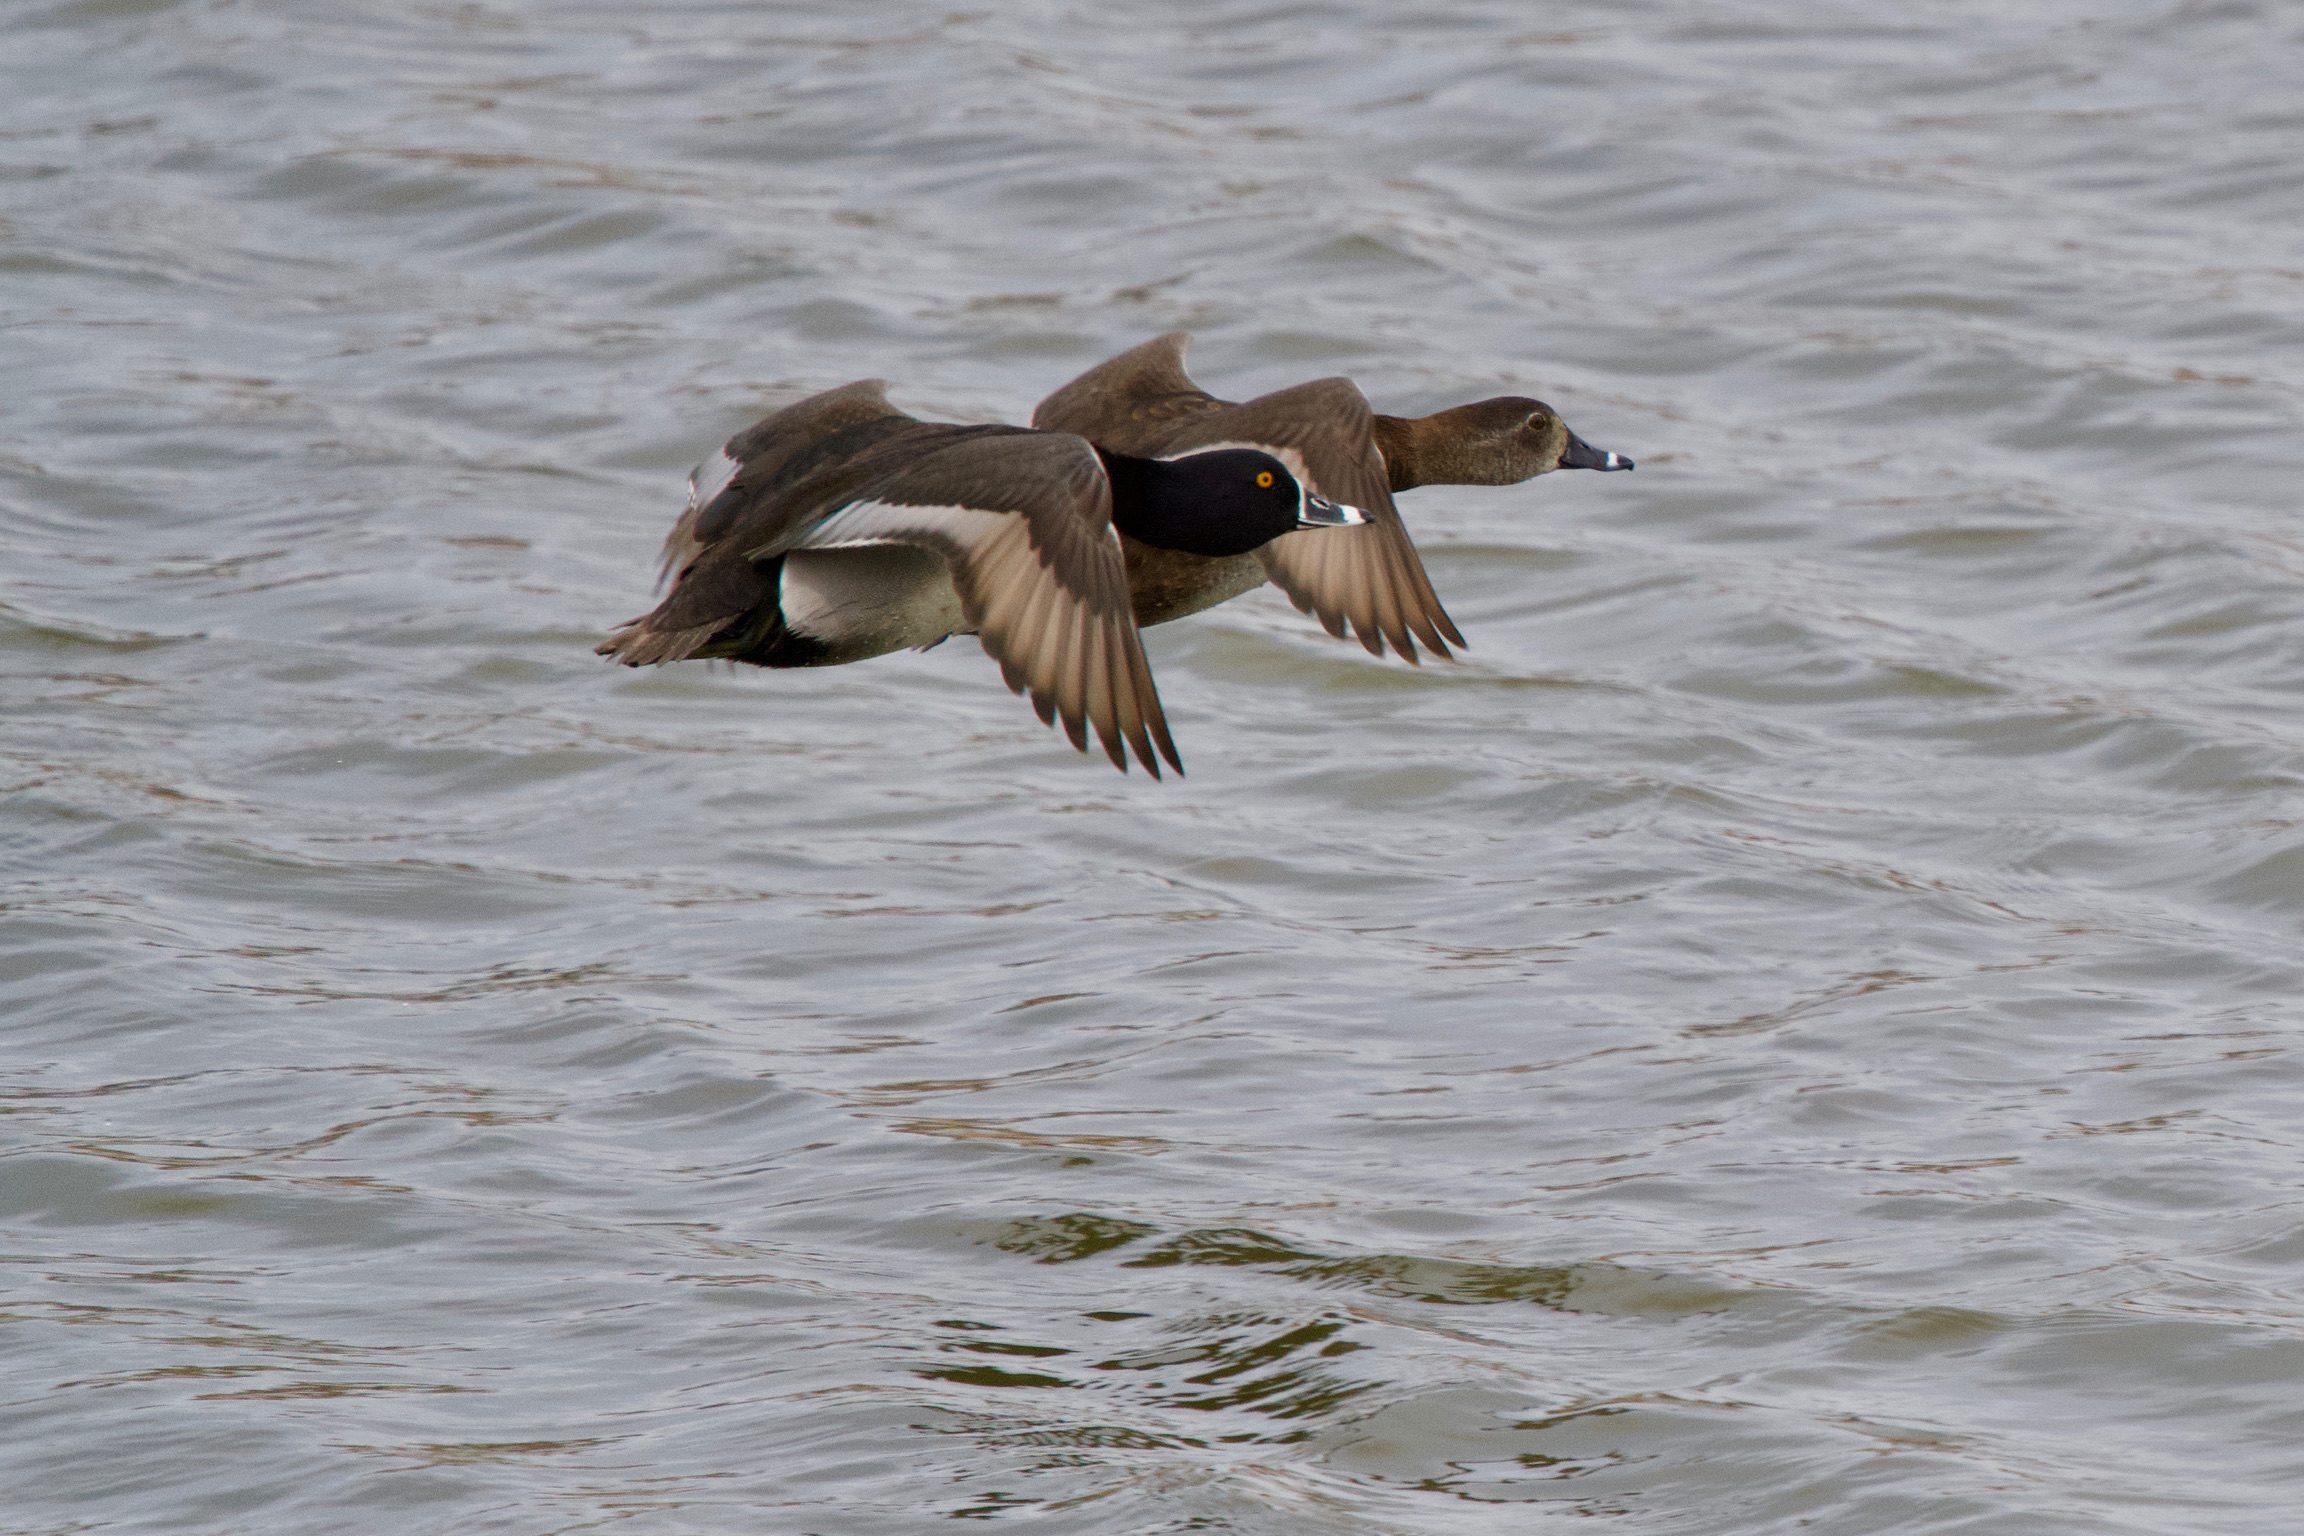 Ring-Necked Ducks - flying low over water